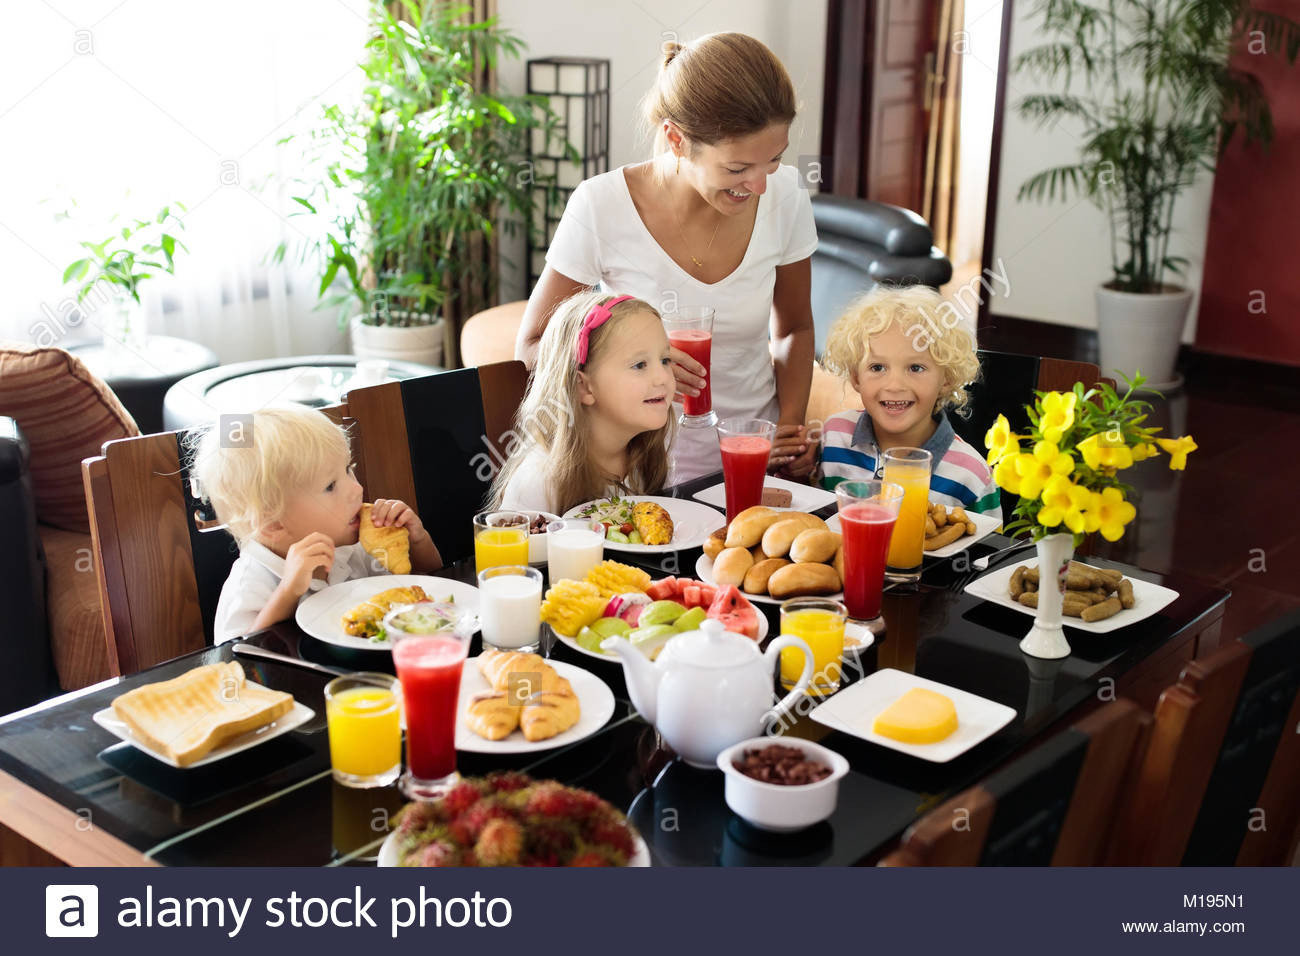 Healthy Family Breakfast
 Healthy family breakfast at home Mother and kids eating